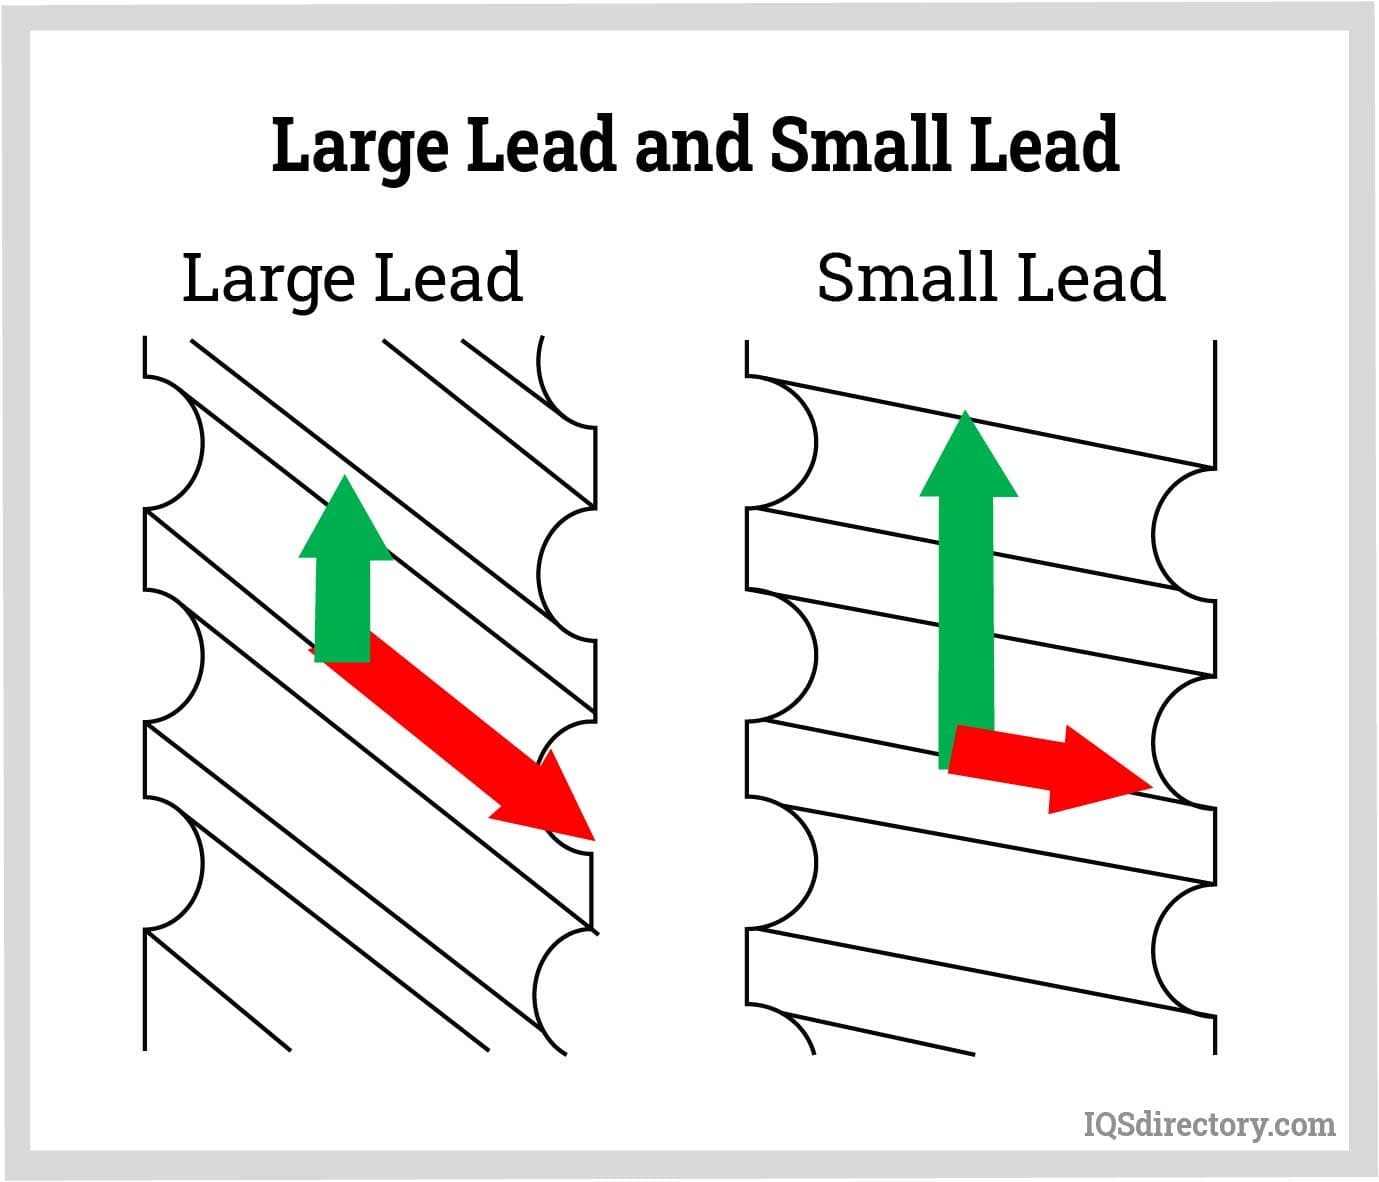 Large Lead and Small Lead